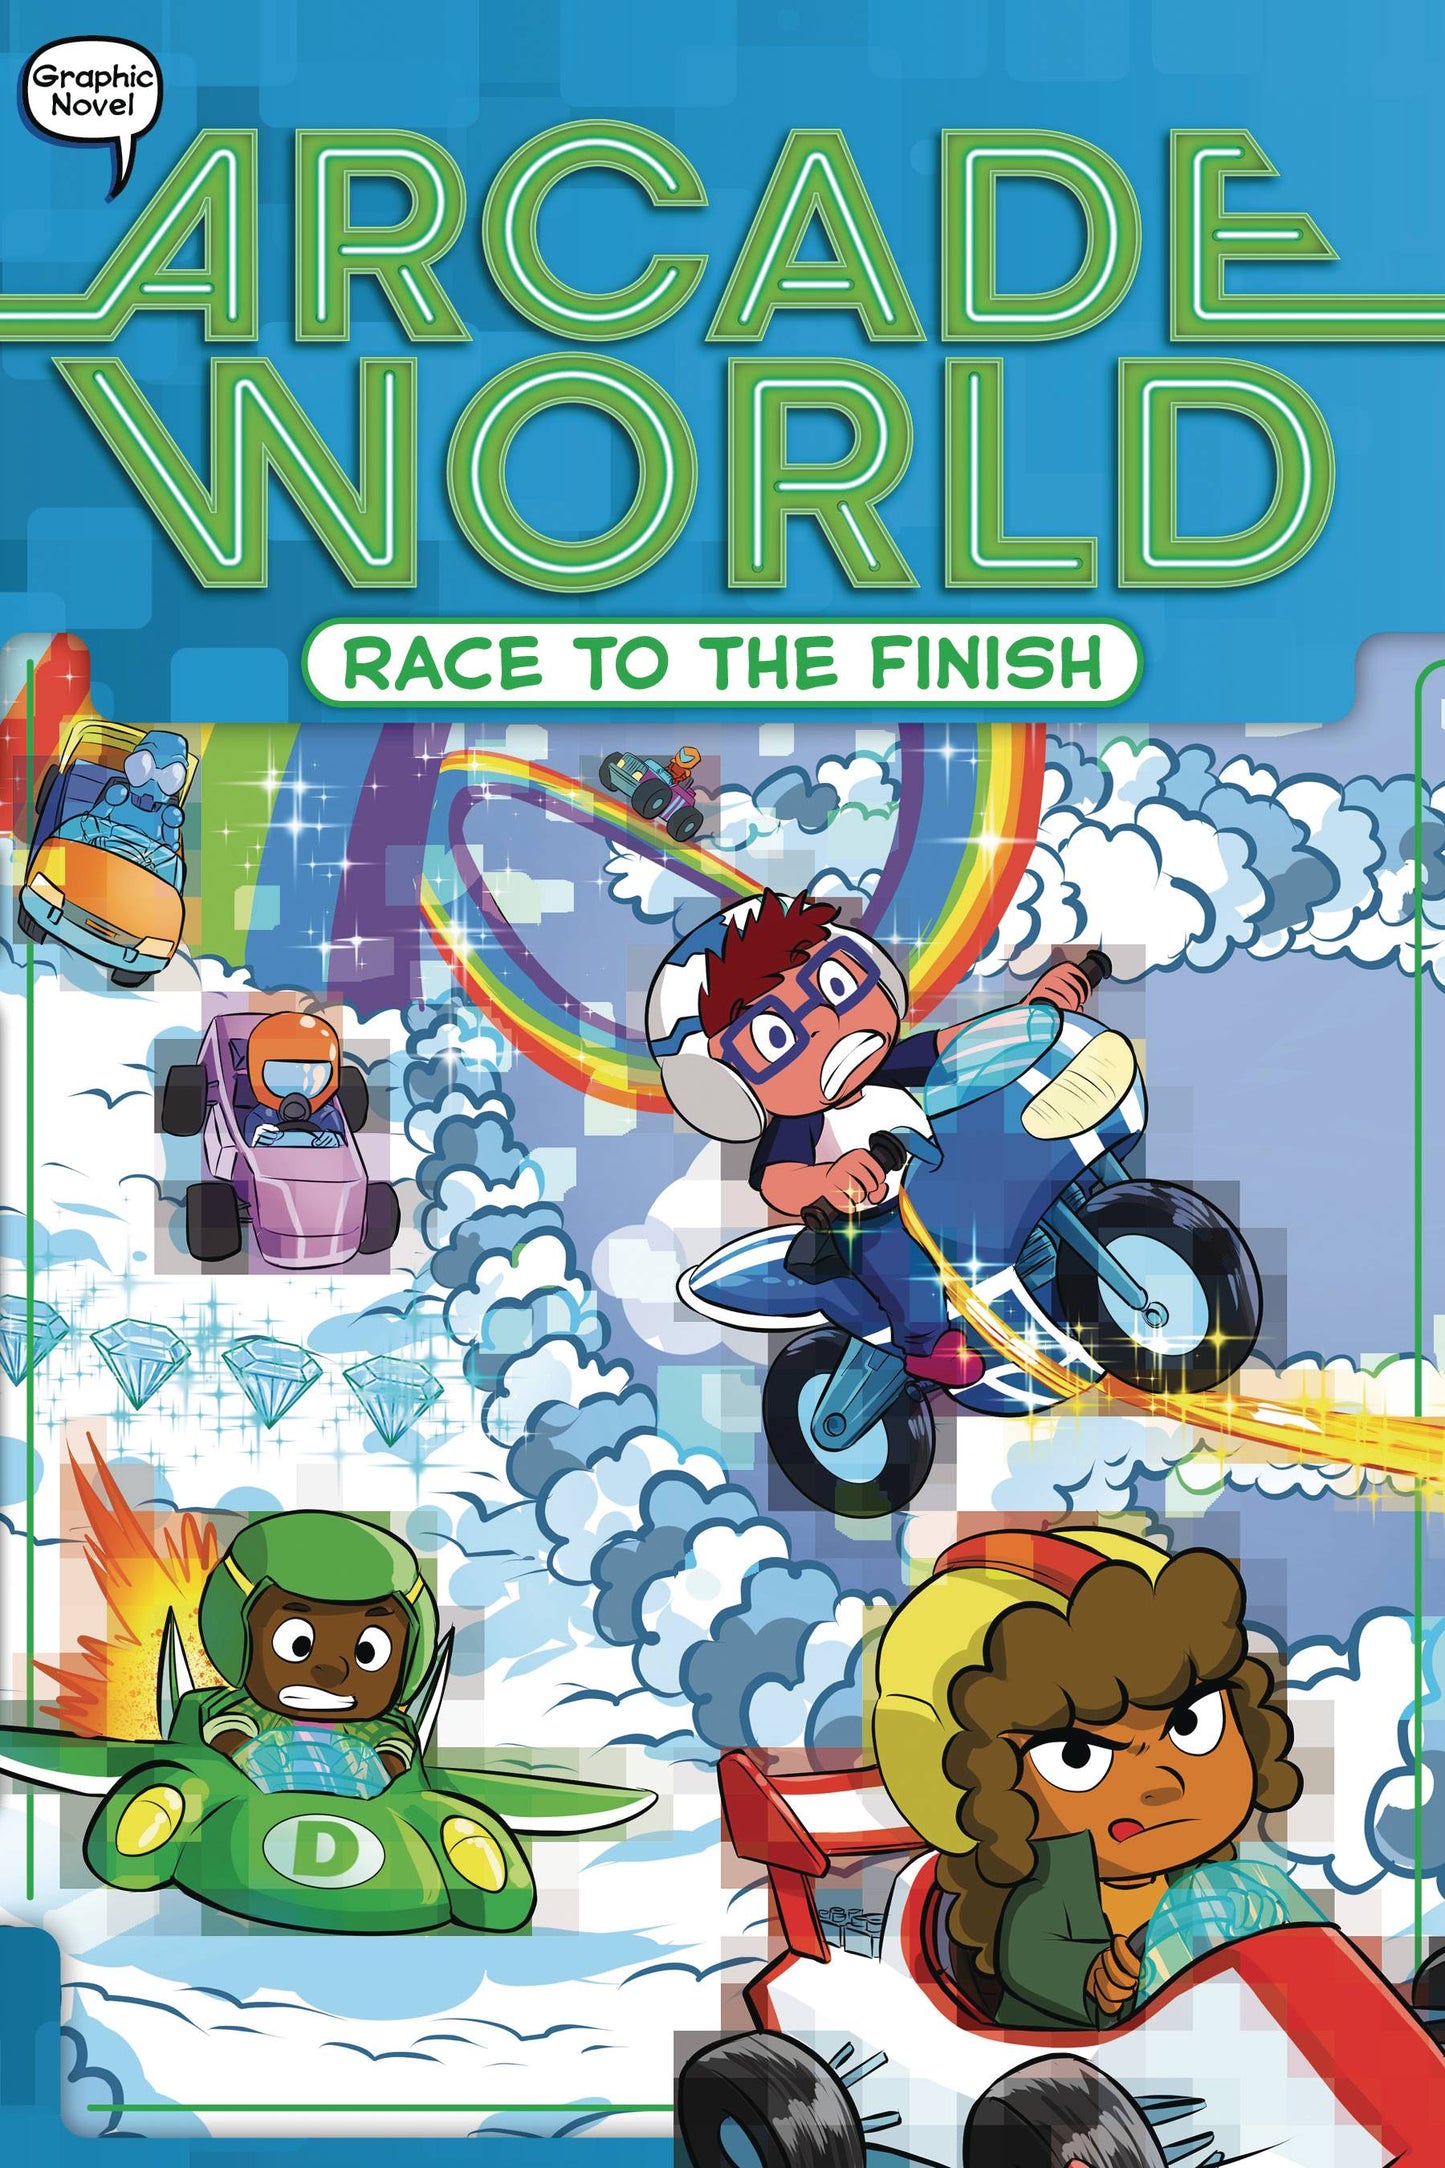 ARCADE WORLD GN CHAPTERBOOK VOL 05 RACE TO THE FINISH (C: 0-